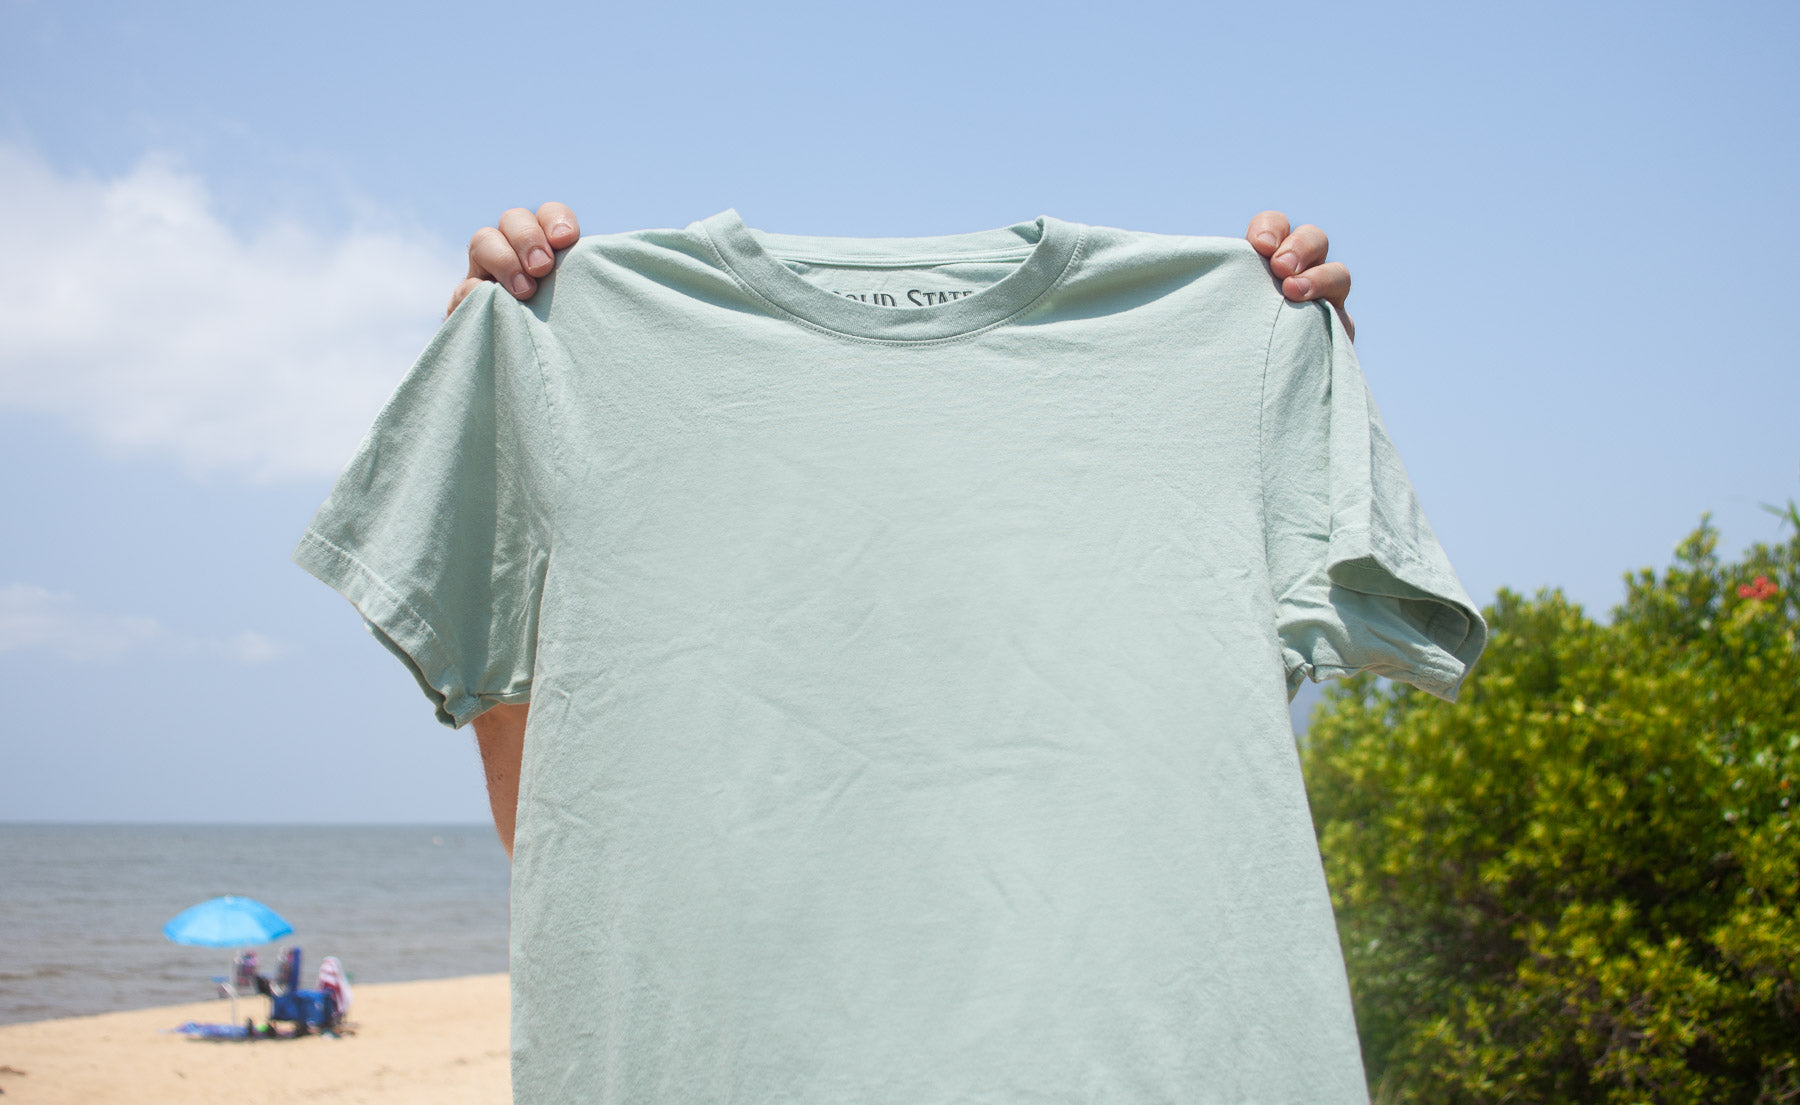 A sage green made in usa t-shirt being held up by a person on a beach